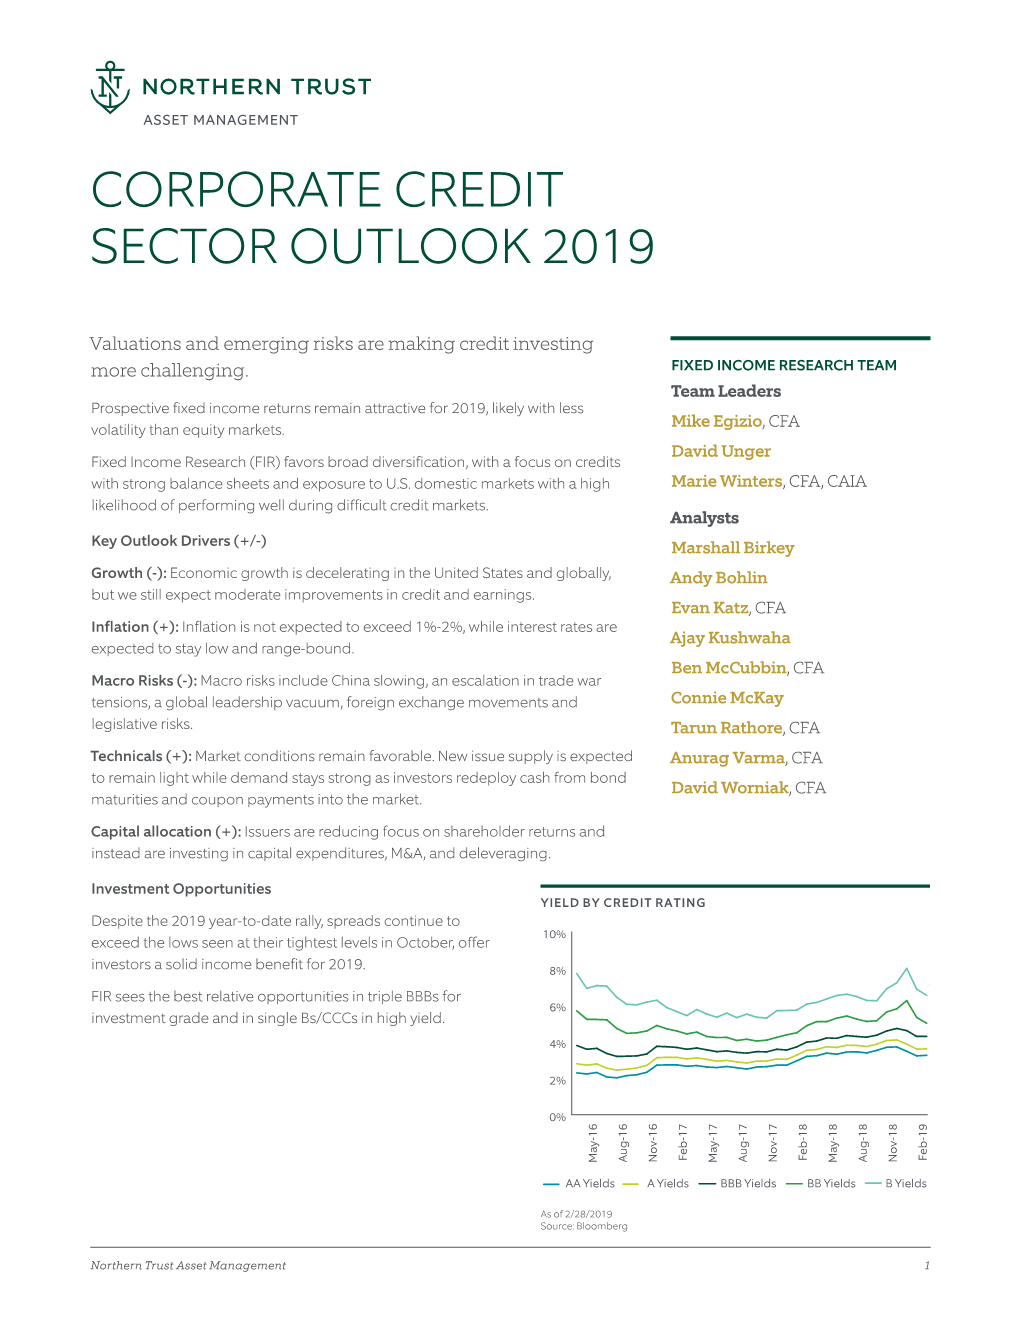 Corporate Credit Sector Outlook 2019